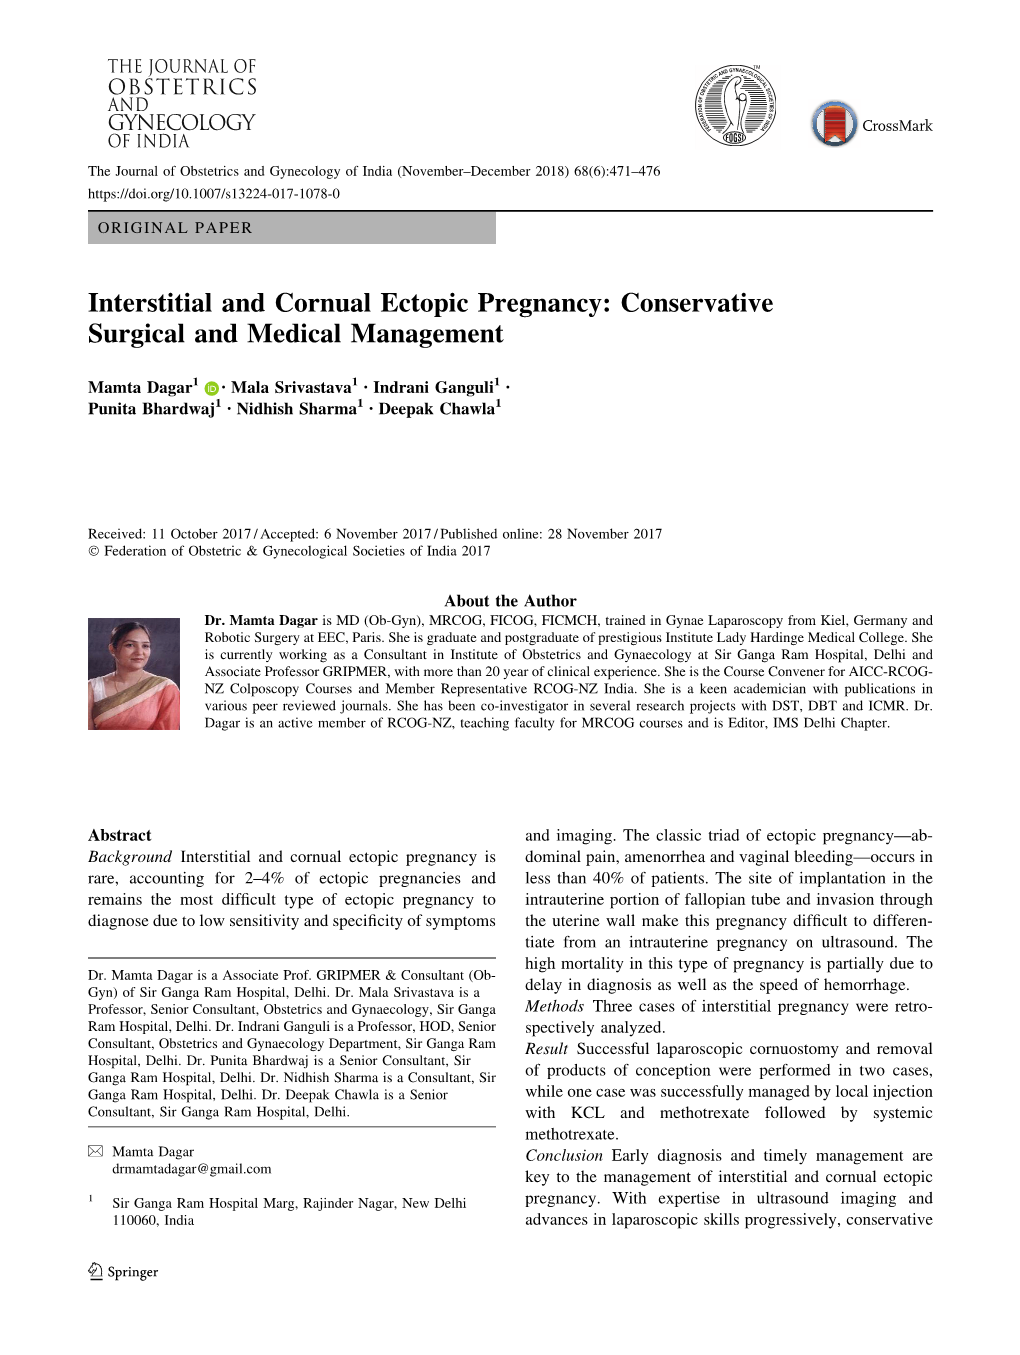 Interstitial and Cornual Ectopic Pregnancy: Conservative Surgical and Medical Management